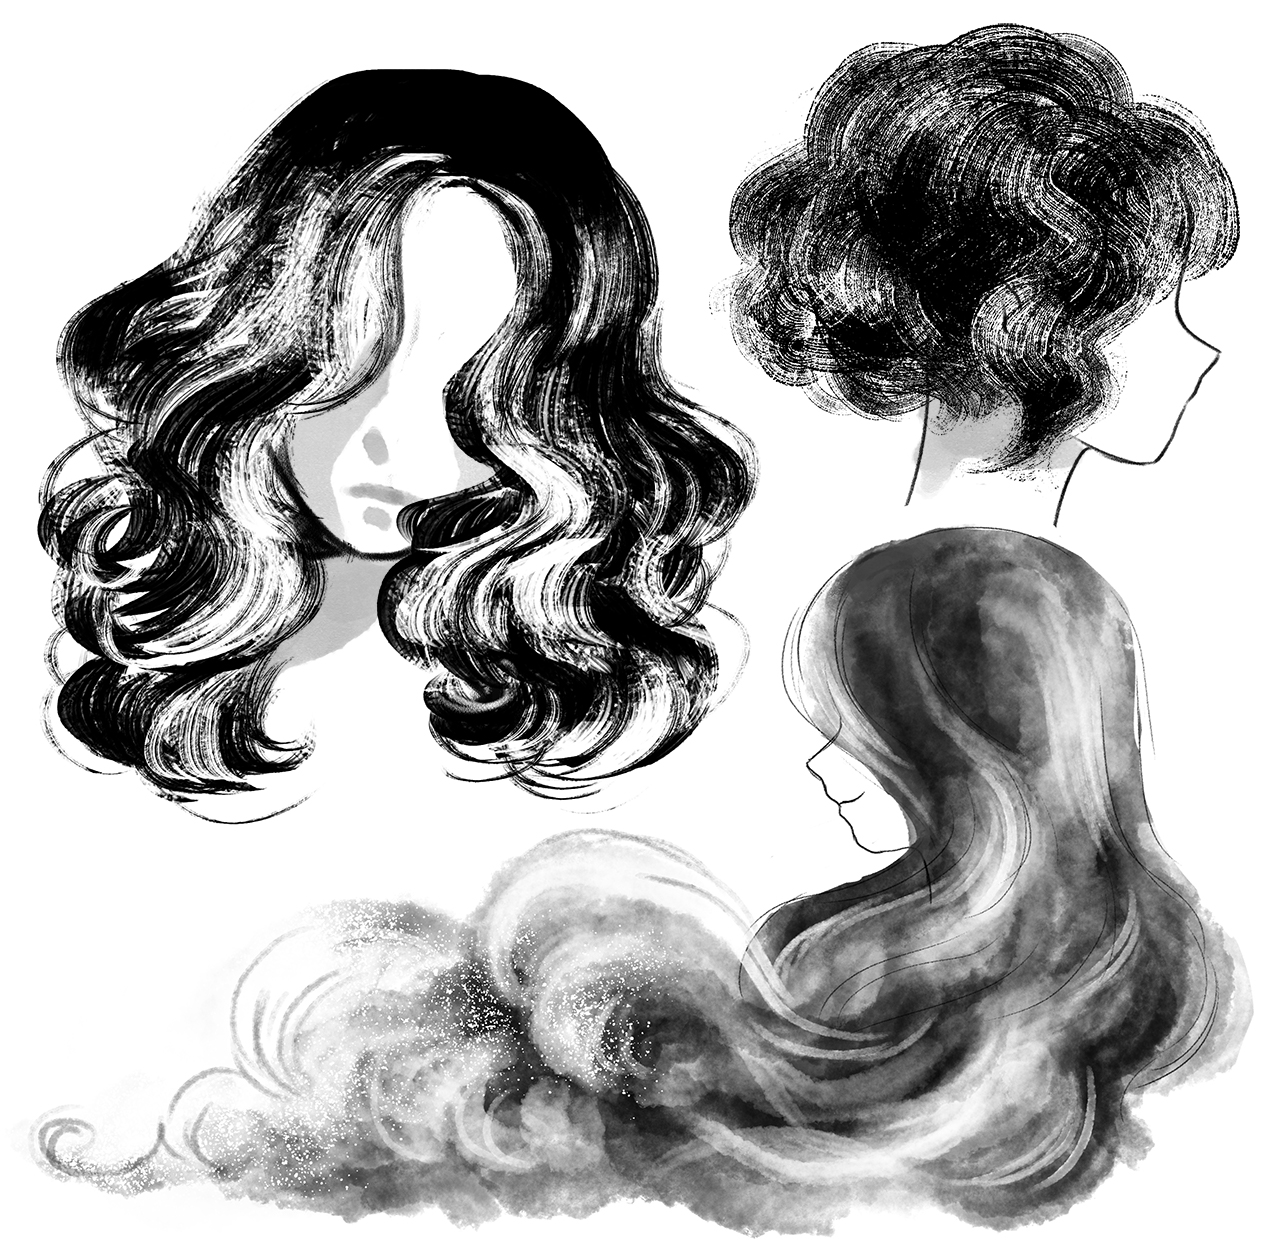 Drawing wavy hair reference with different textures